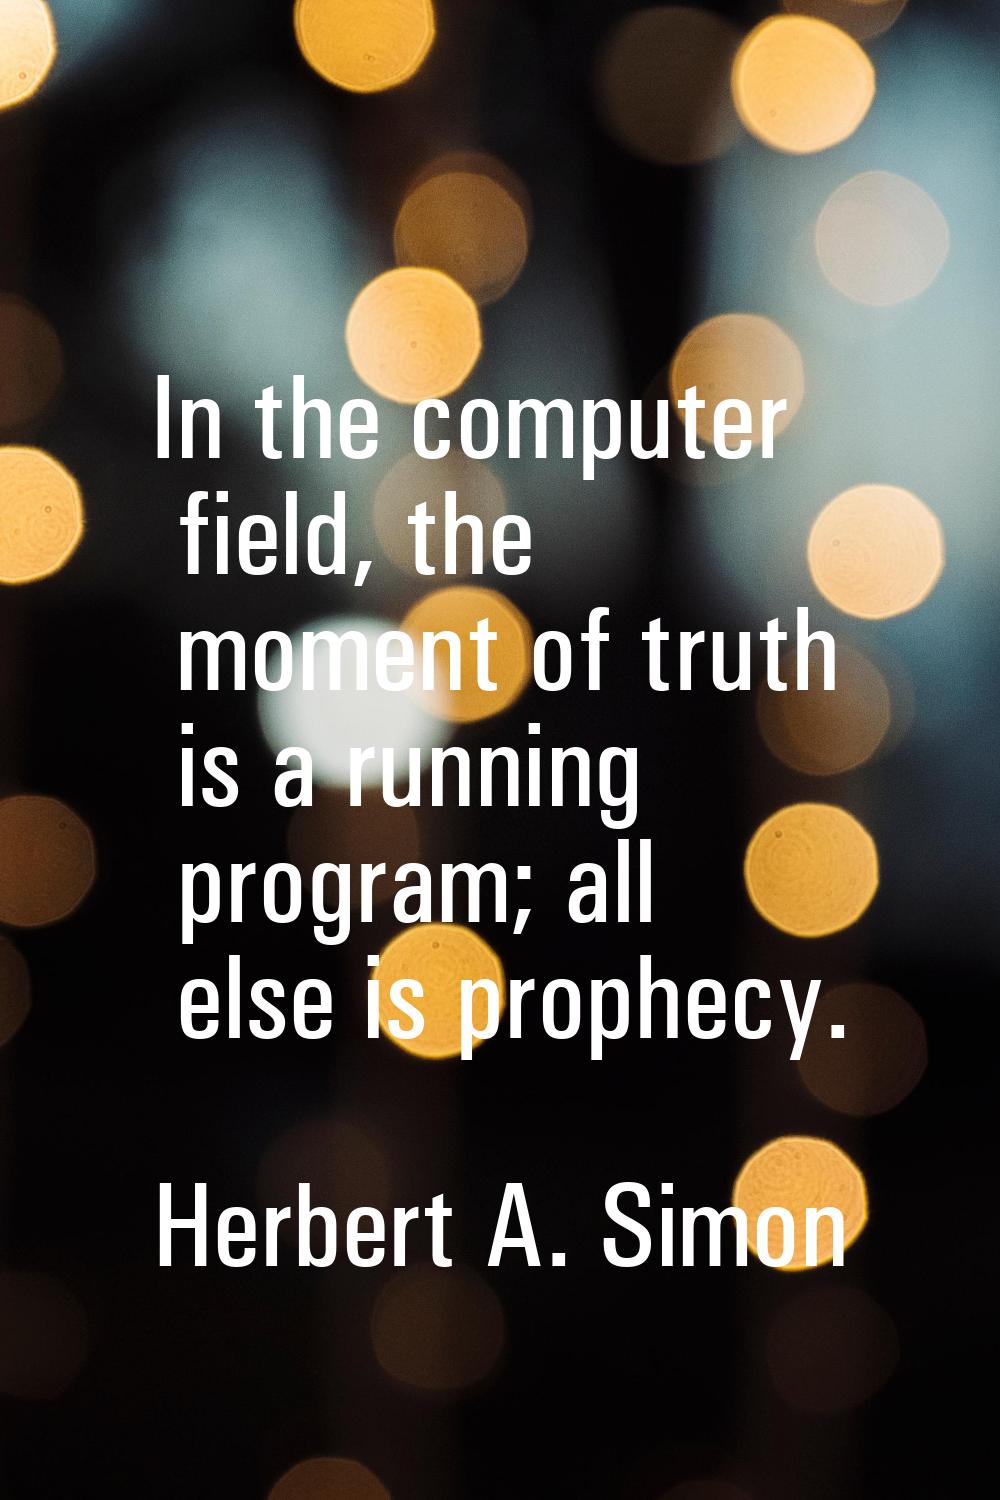 In the computer field, the moment of truth is a running program; all else is prophecy.